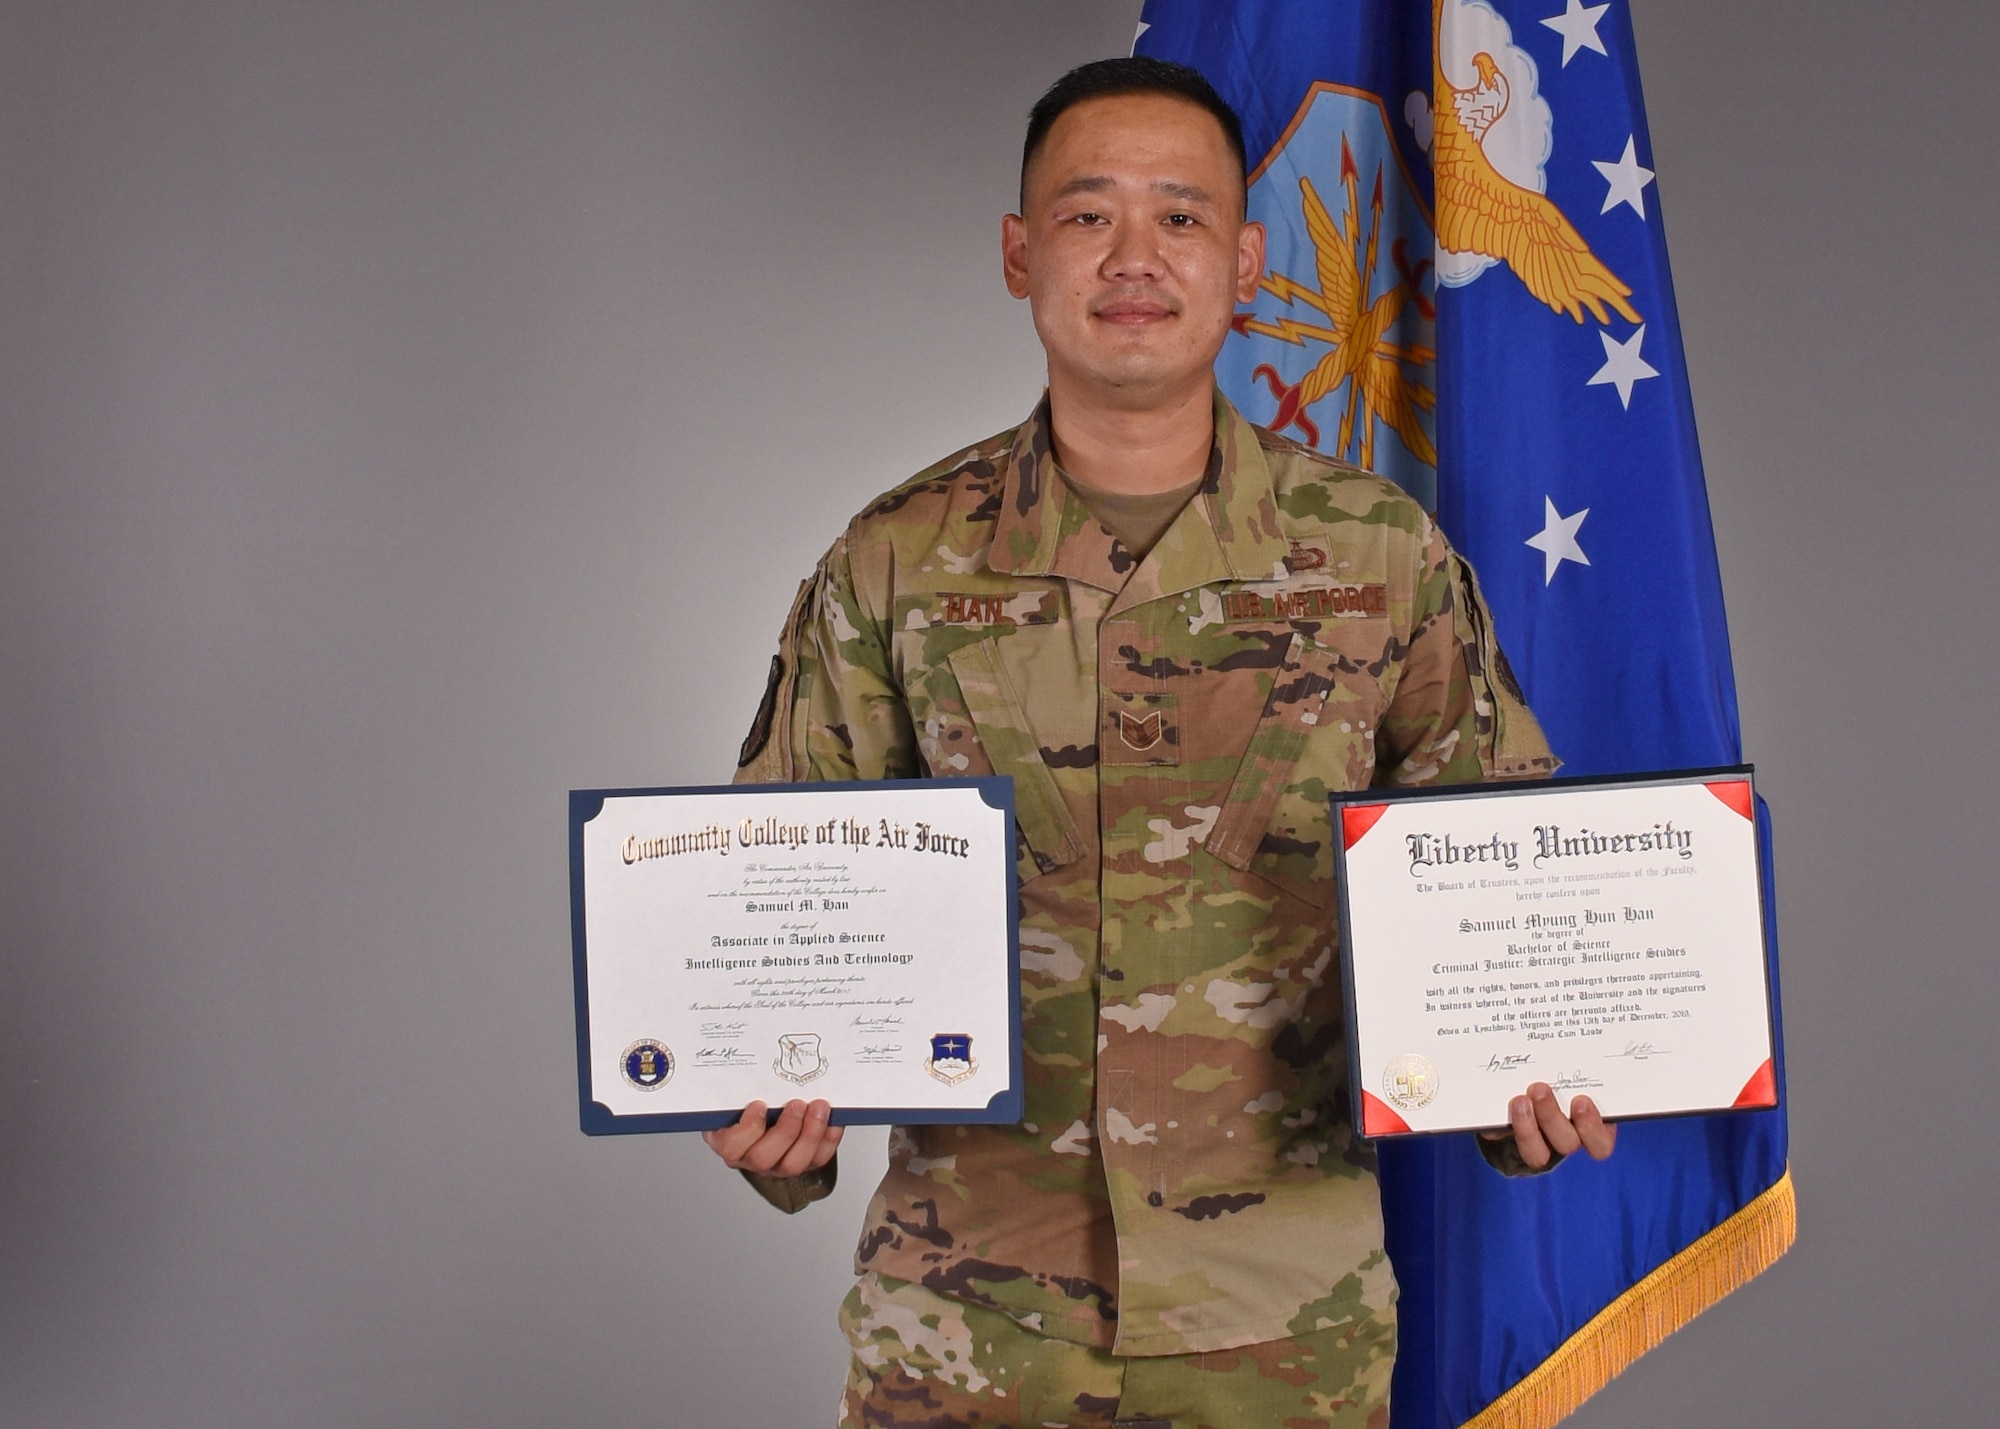 U.S. Air Force Tech. Sgt. Samuel Han, 316th Training Squadron instructor, displays two degrees he achieved while serving active duty, in the Public Affairs photo studio, on Goodfellow Air Force Base, Texas, July 15, 2020. Han’s life and Air Force career started out with adversity, but through positive mentorship, and actively seeking opportunities, he overcame his misfortunes. (U.S. Air Force photo by Airman 1st Class Abbey Rieves)